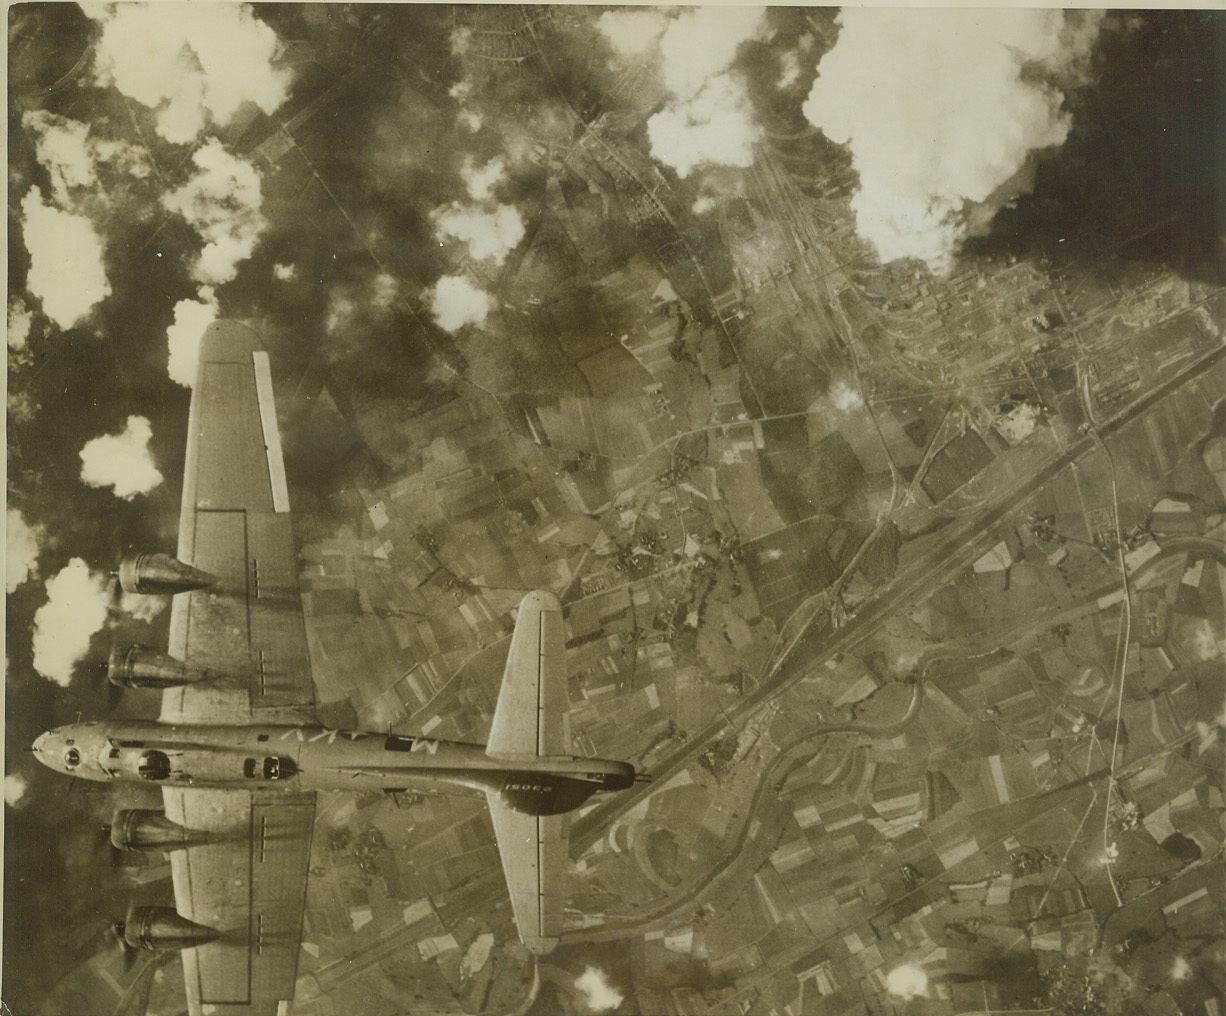 Rub-Out on Rubber, 6/29/1943. RUHR, GERMANY -- Hell breaks loose in the Ruhr, as a close-packed formation on Flying Fortresses scrambles synthetic rubber plants at Huls. The camera picked out this one Fortress out of the close formation flown by the big bombers to mass their fire power against enemy fighters. In the upper right hand corner the smoke from a blasted factory rises up over the target area as group after group of Fortresses roar through their bombing runs. Credit: (ACME);